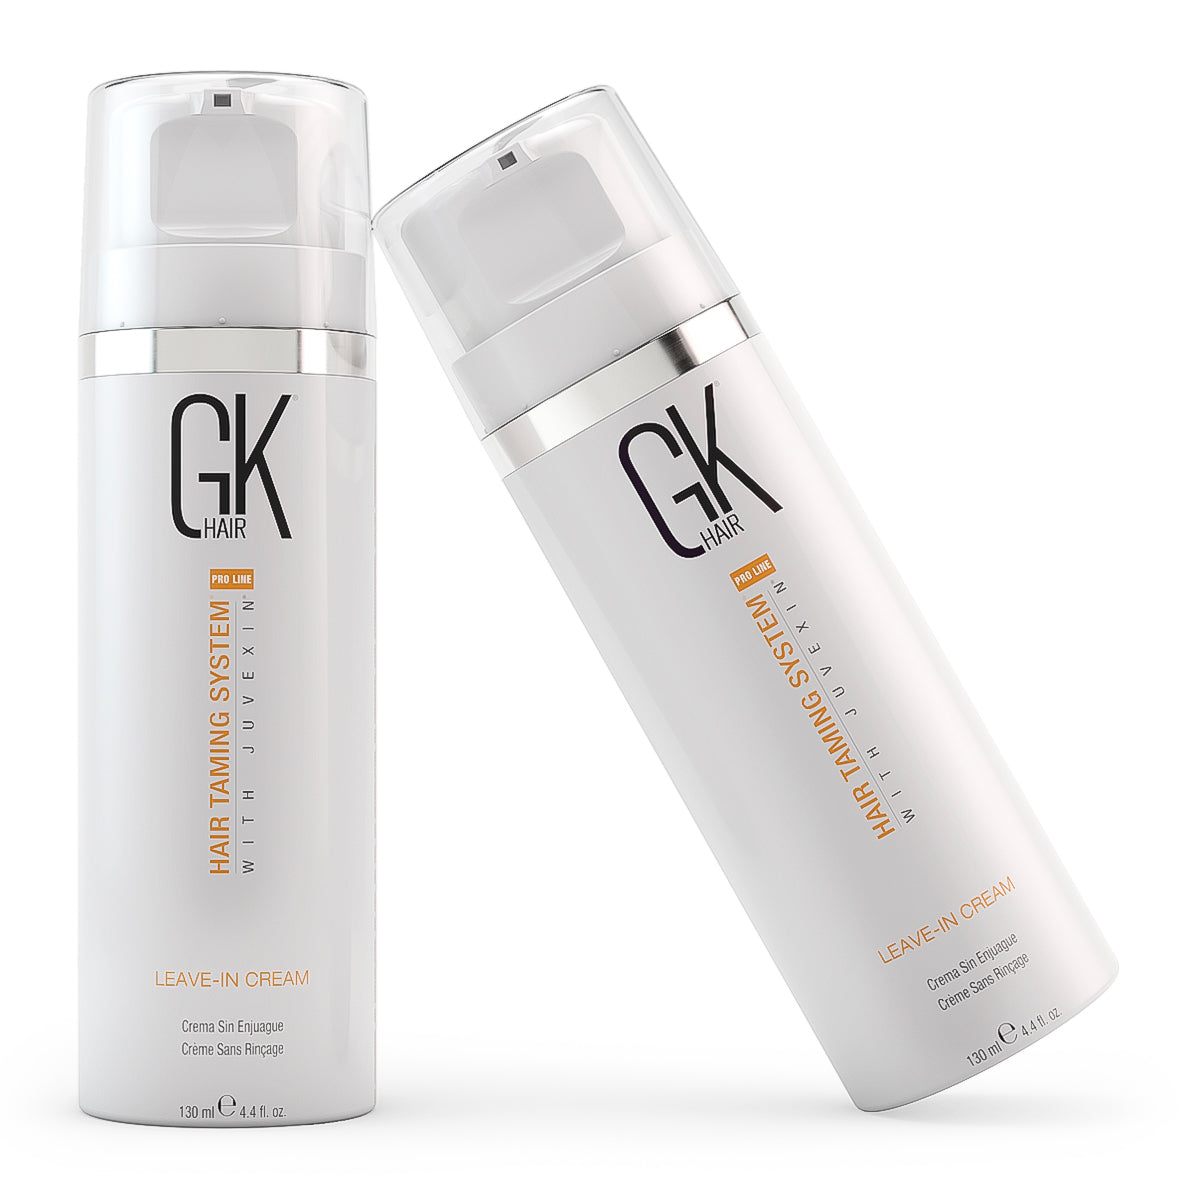 GK Hair Leave-In Conditioner: Silky-smooth, nourished locks in a 130mL bottle.